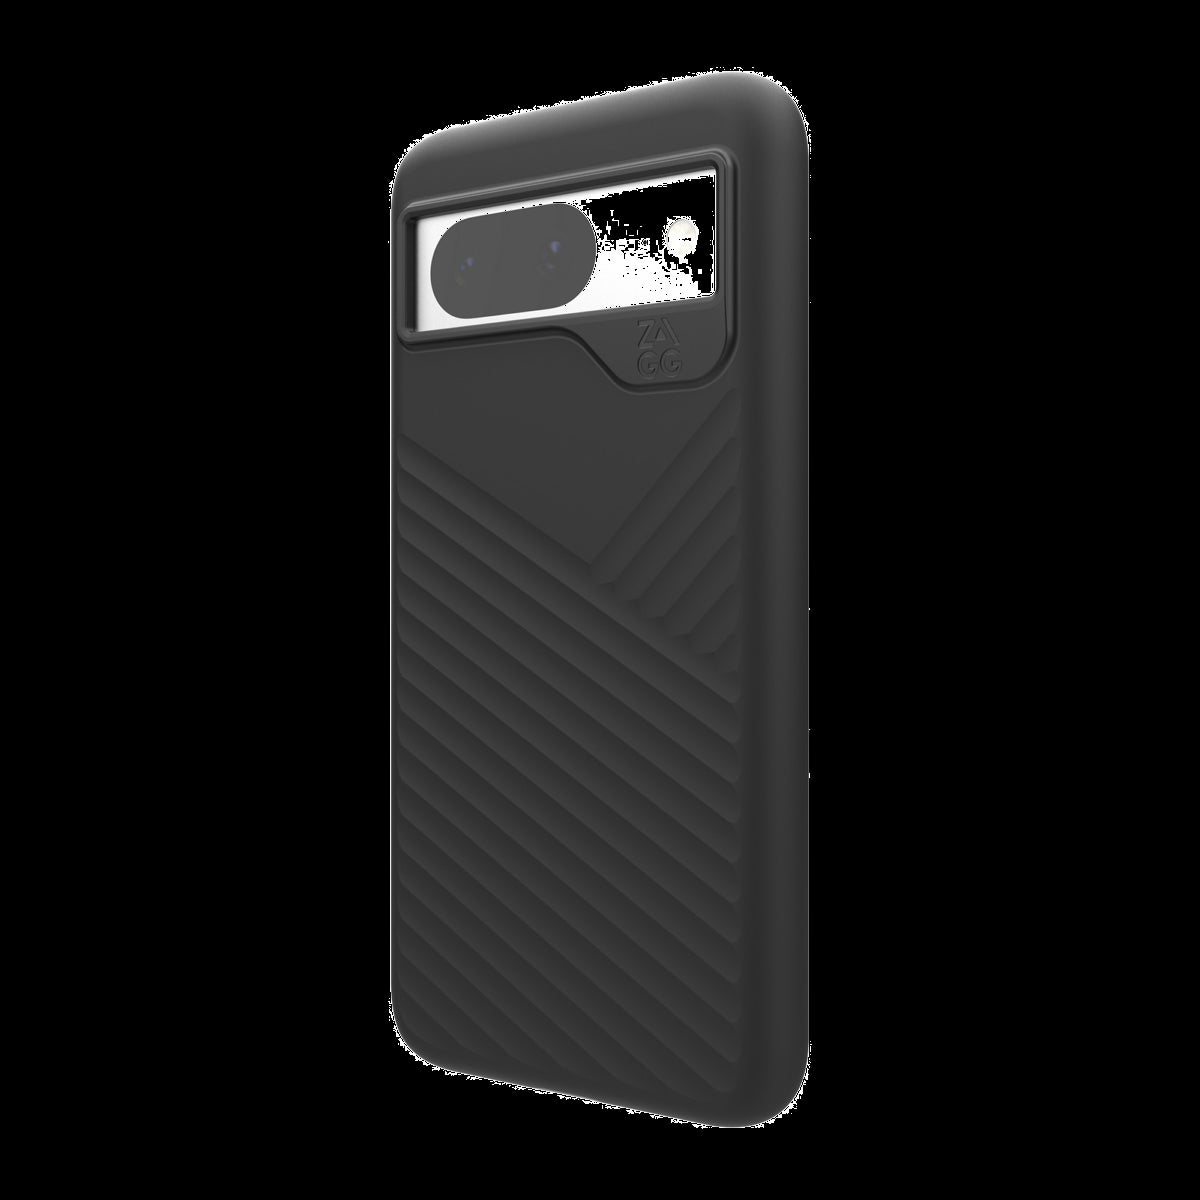 <p>Strengthened with Graphene, ZAGG’s Denali series case offers an impressive 16 ft drop protection through its innovative dual-layer design.</p>